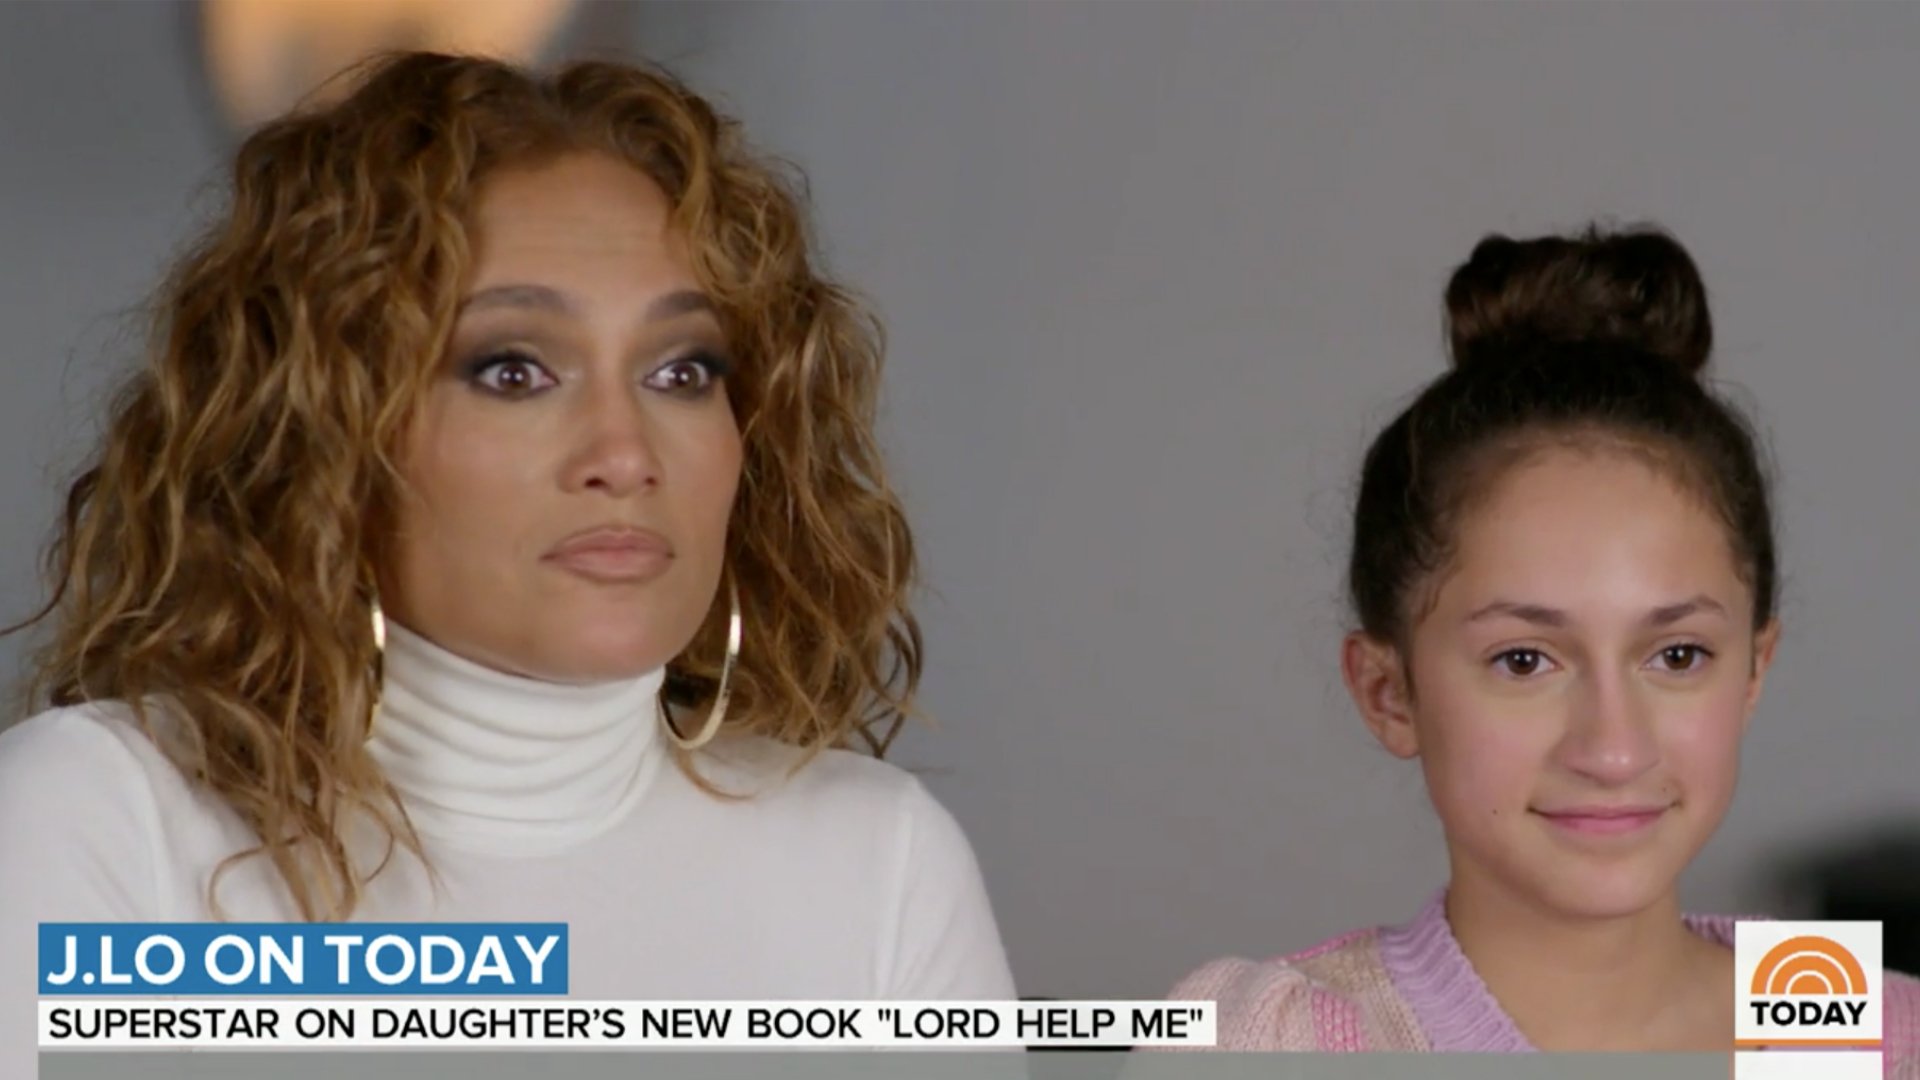 1. Jennifer Lopez's Daughter Emme Shows Off Blue Hair in Adorable Photo - wide 5